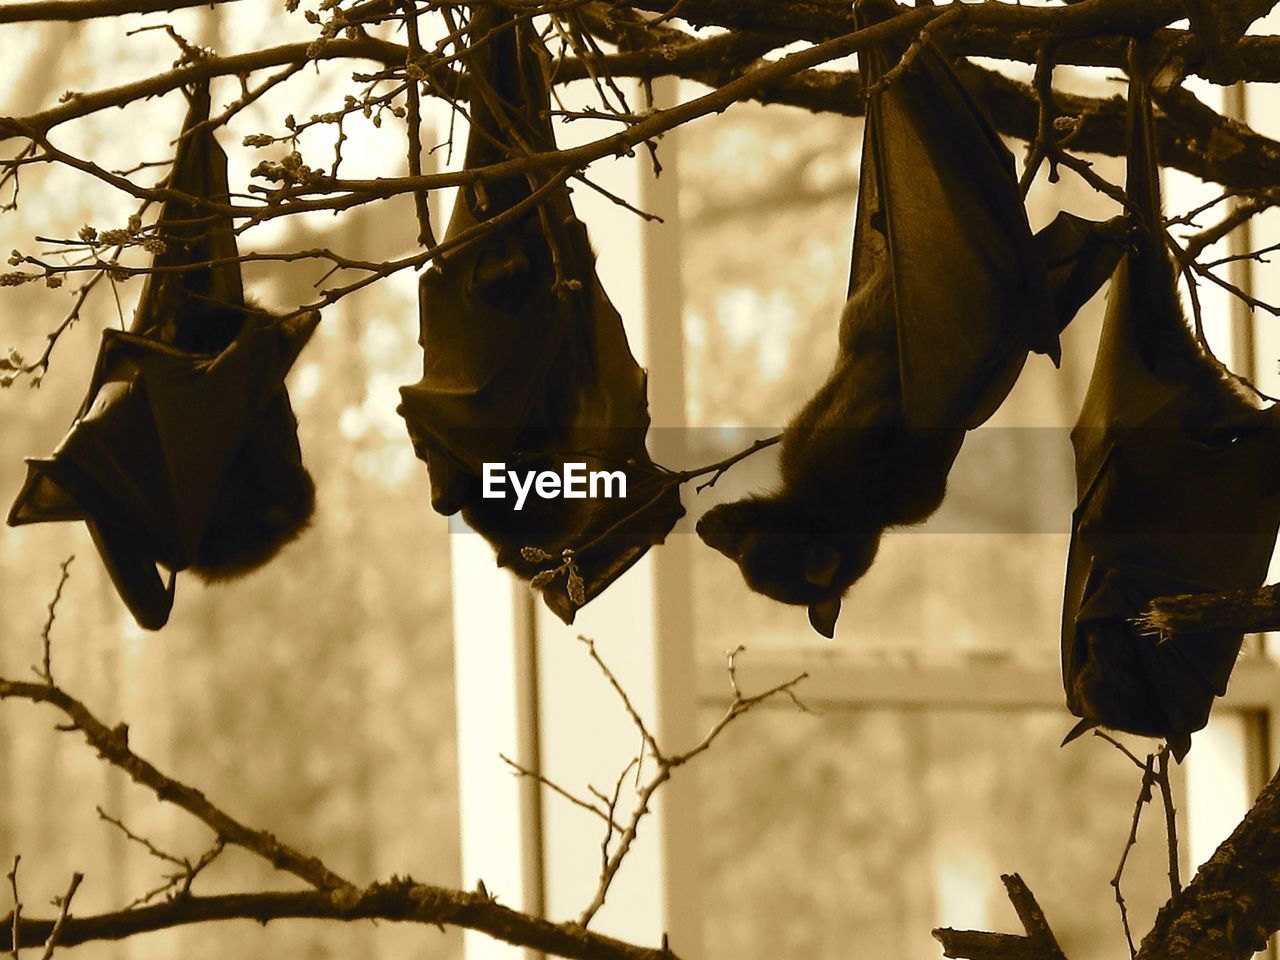 Bats hanging on tree branch in forest